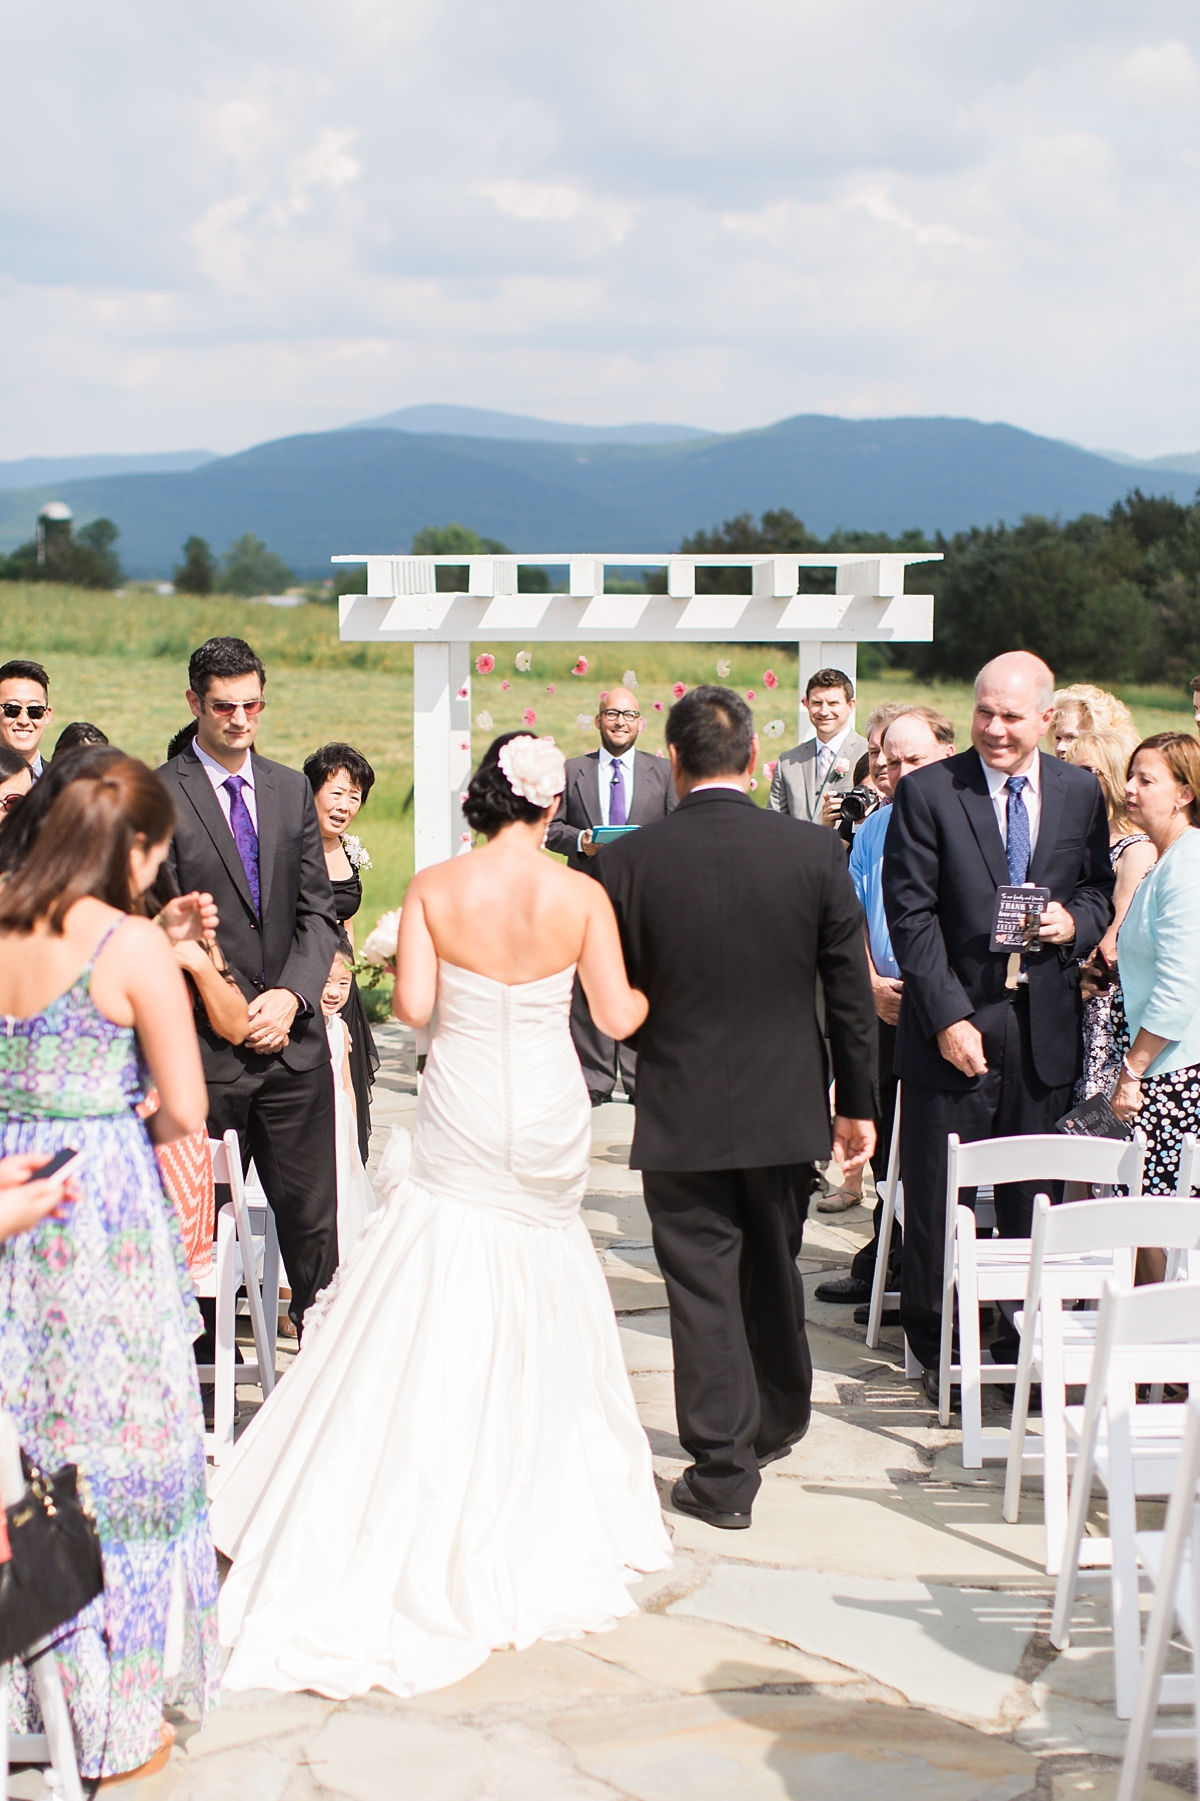 A rustic chic summer wedding at The Barn at Walnut Grove -- just outside the campus of James Madison University in Harrisonburg, VA. 